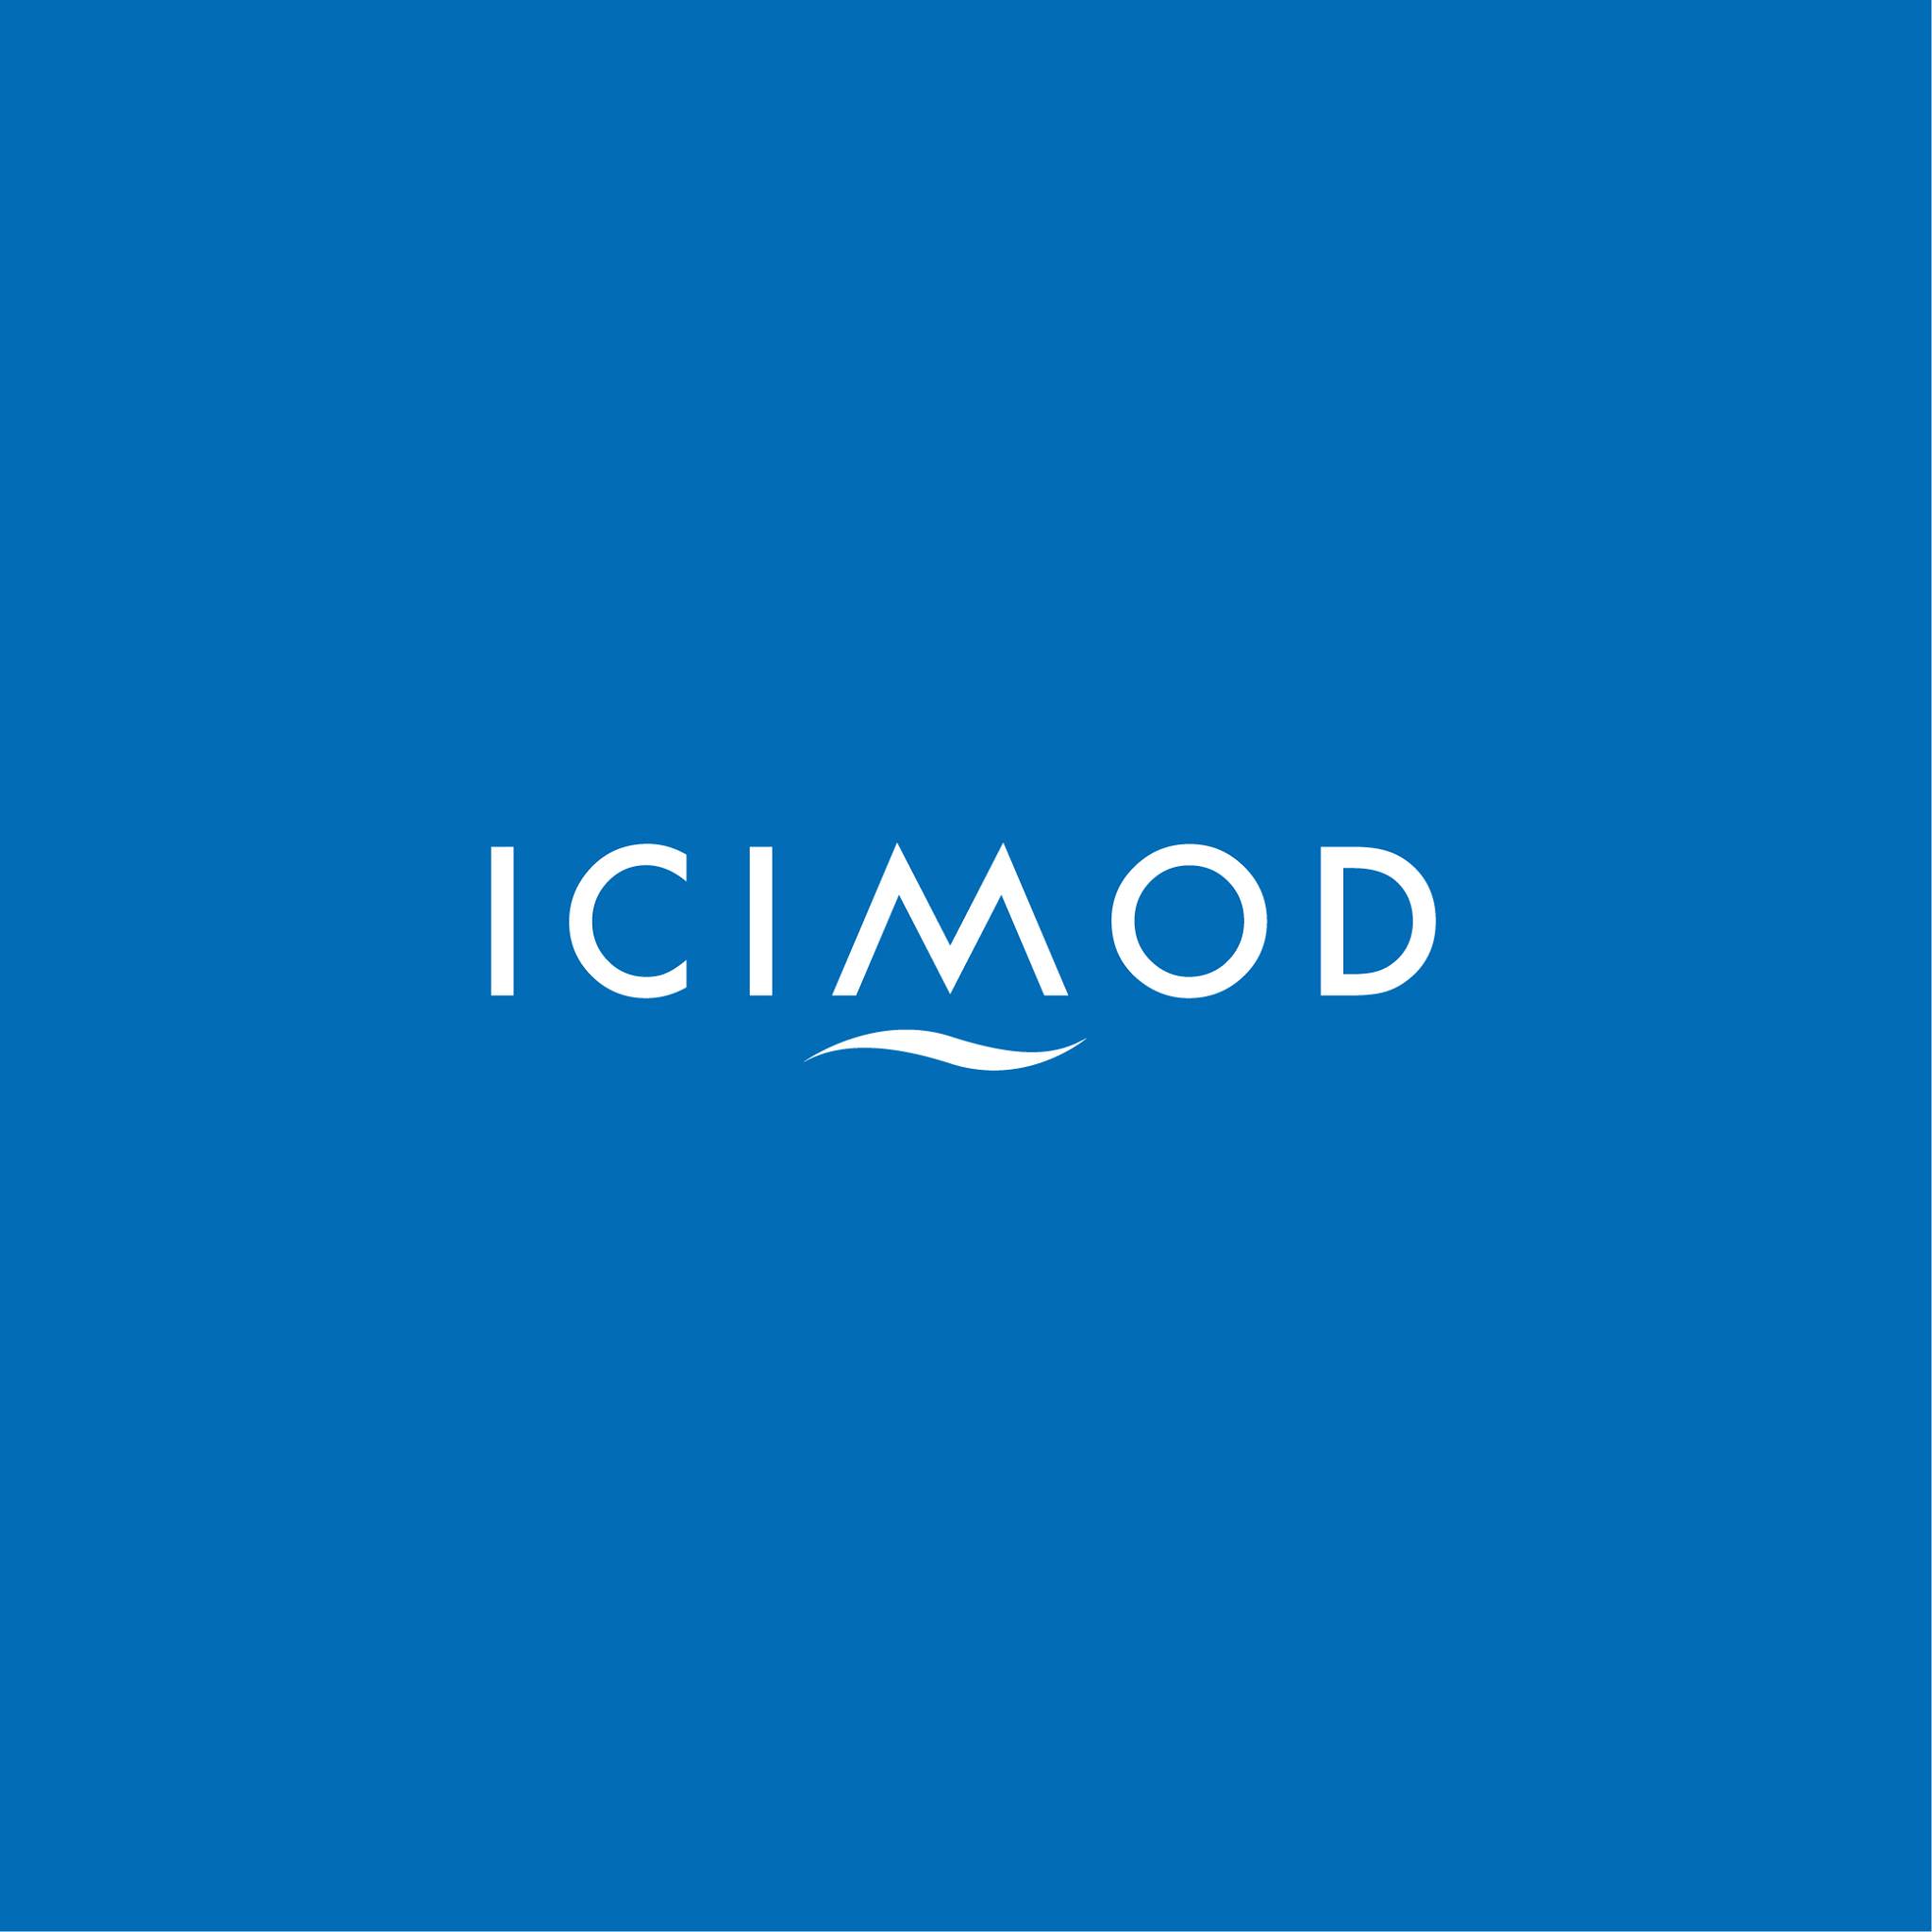 Agreement between Agriculture and Forestry University, ICIMOD